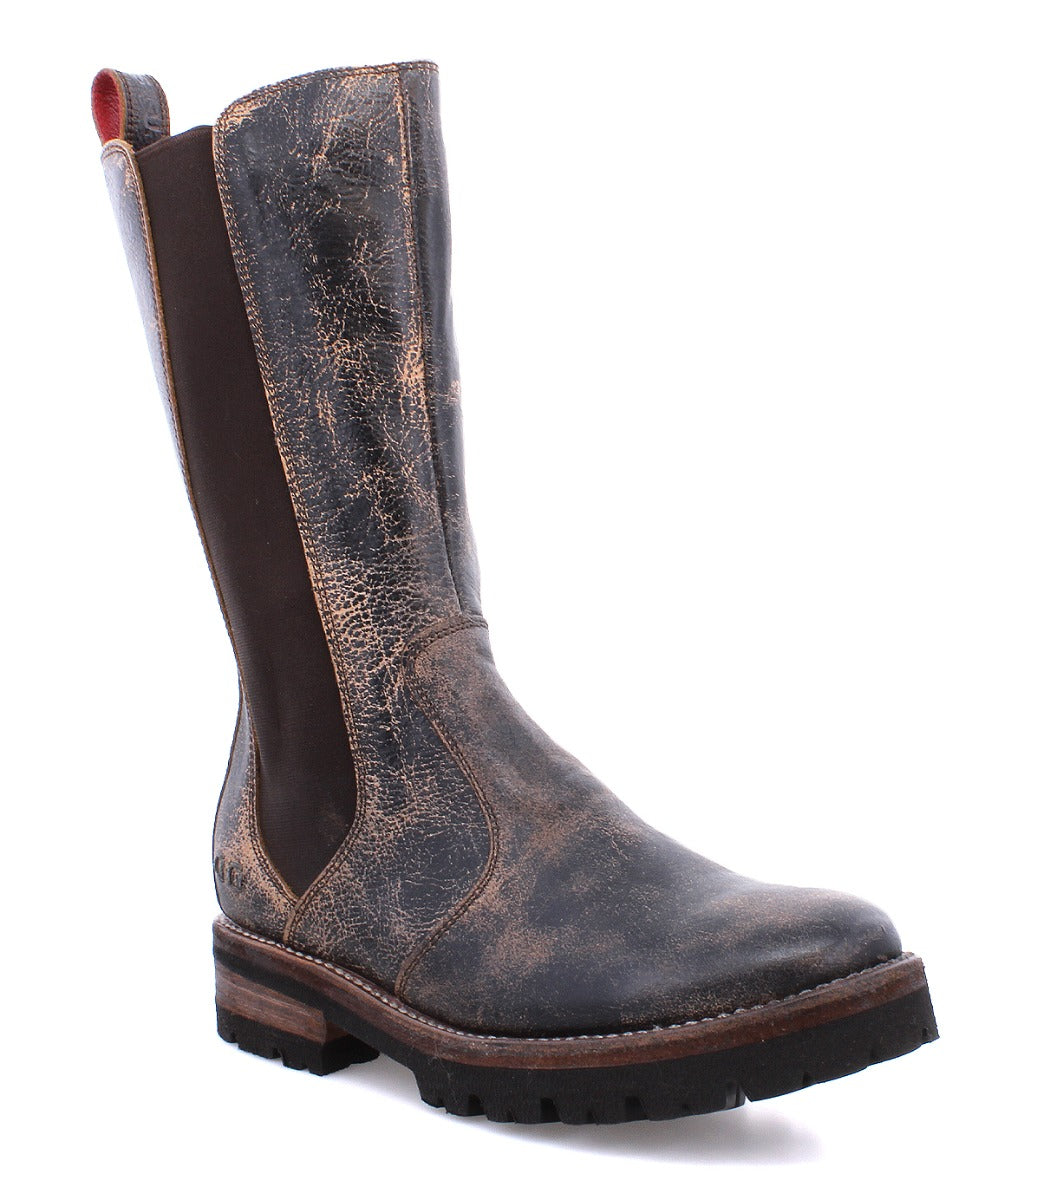 A women's Bed Stu Kataleya brown leather boot with a brown sole.